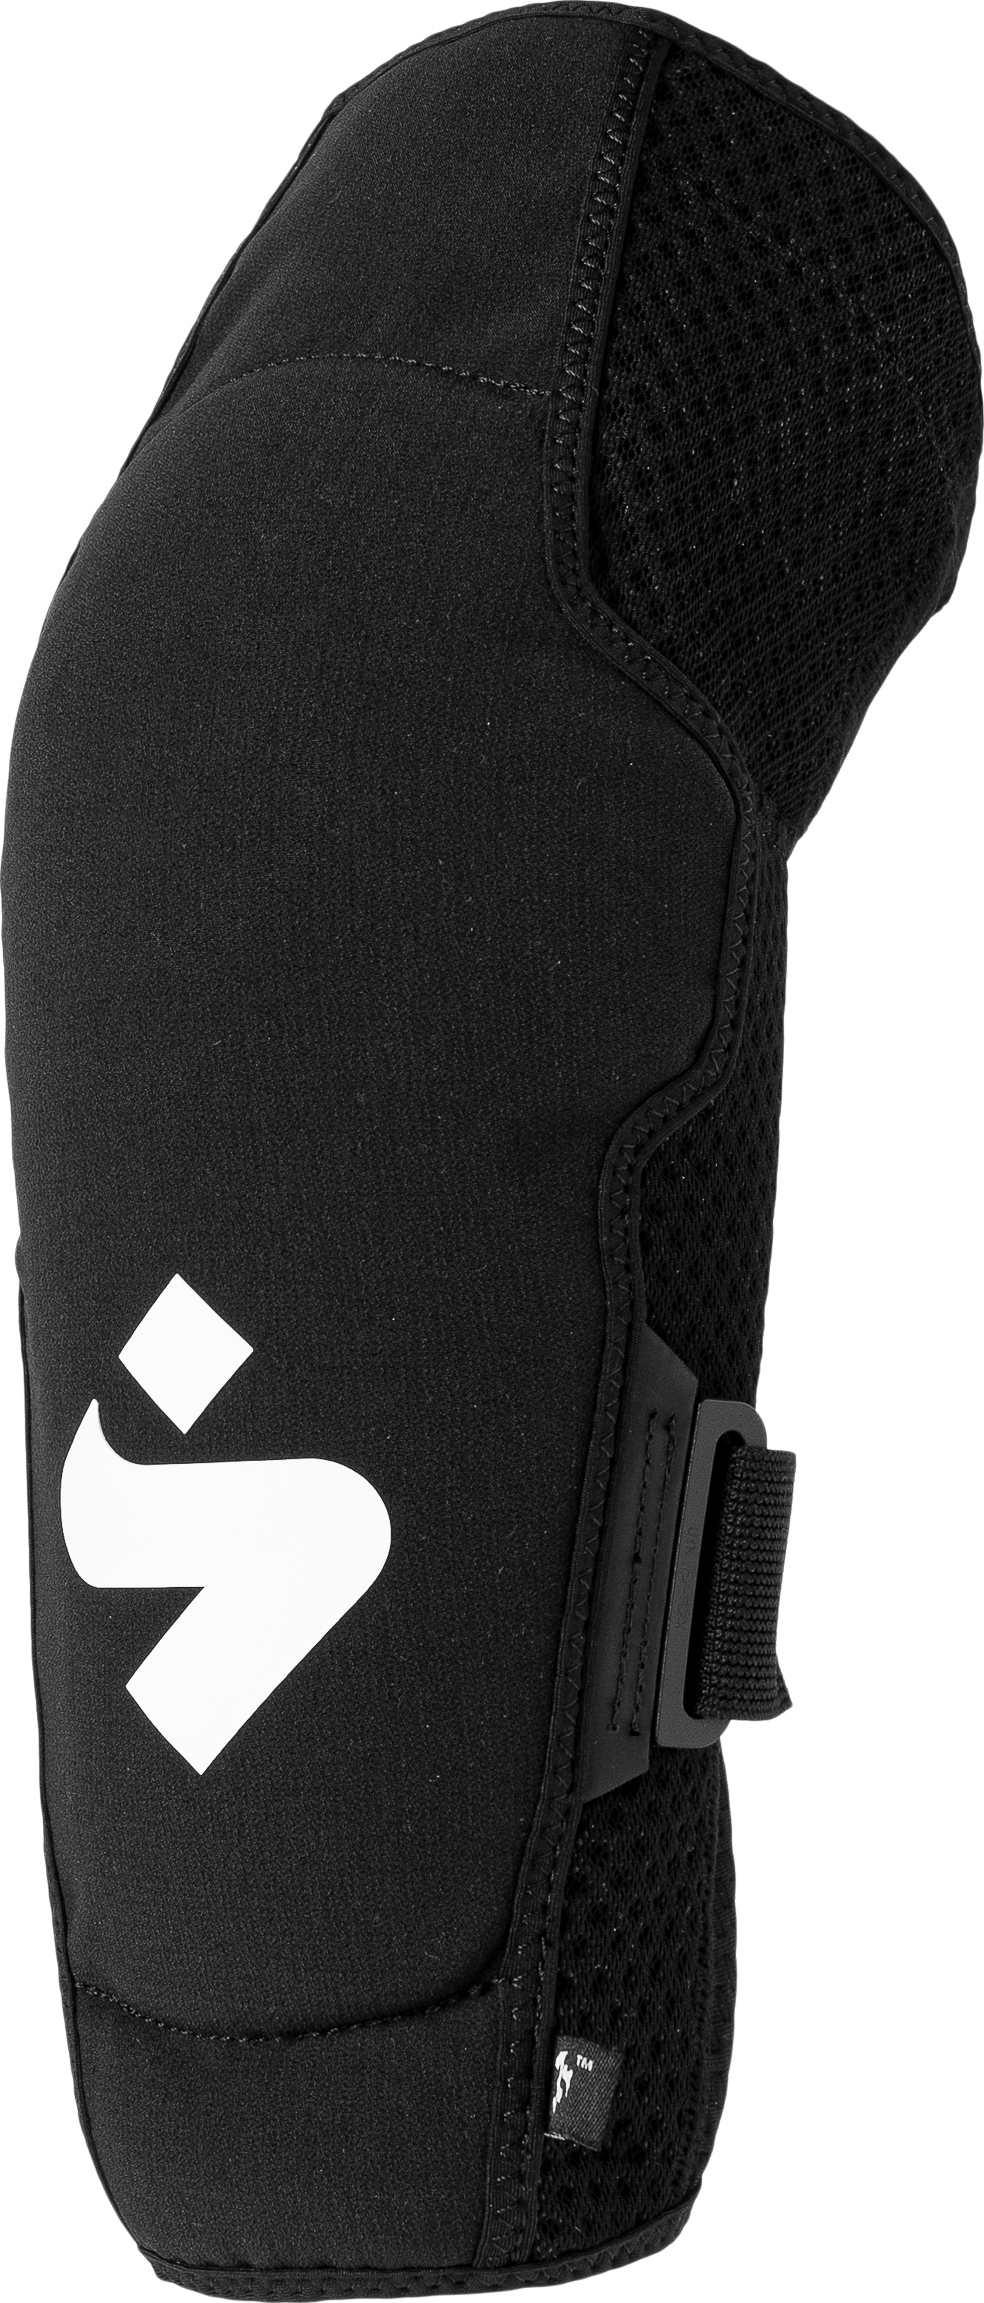 Sweet Protection Knee Guards Pro Black